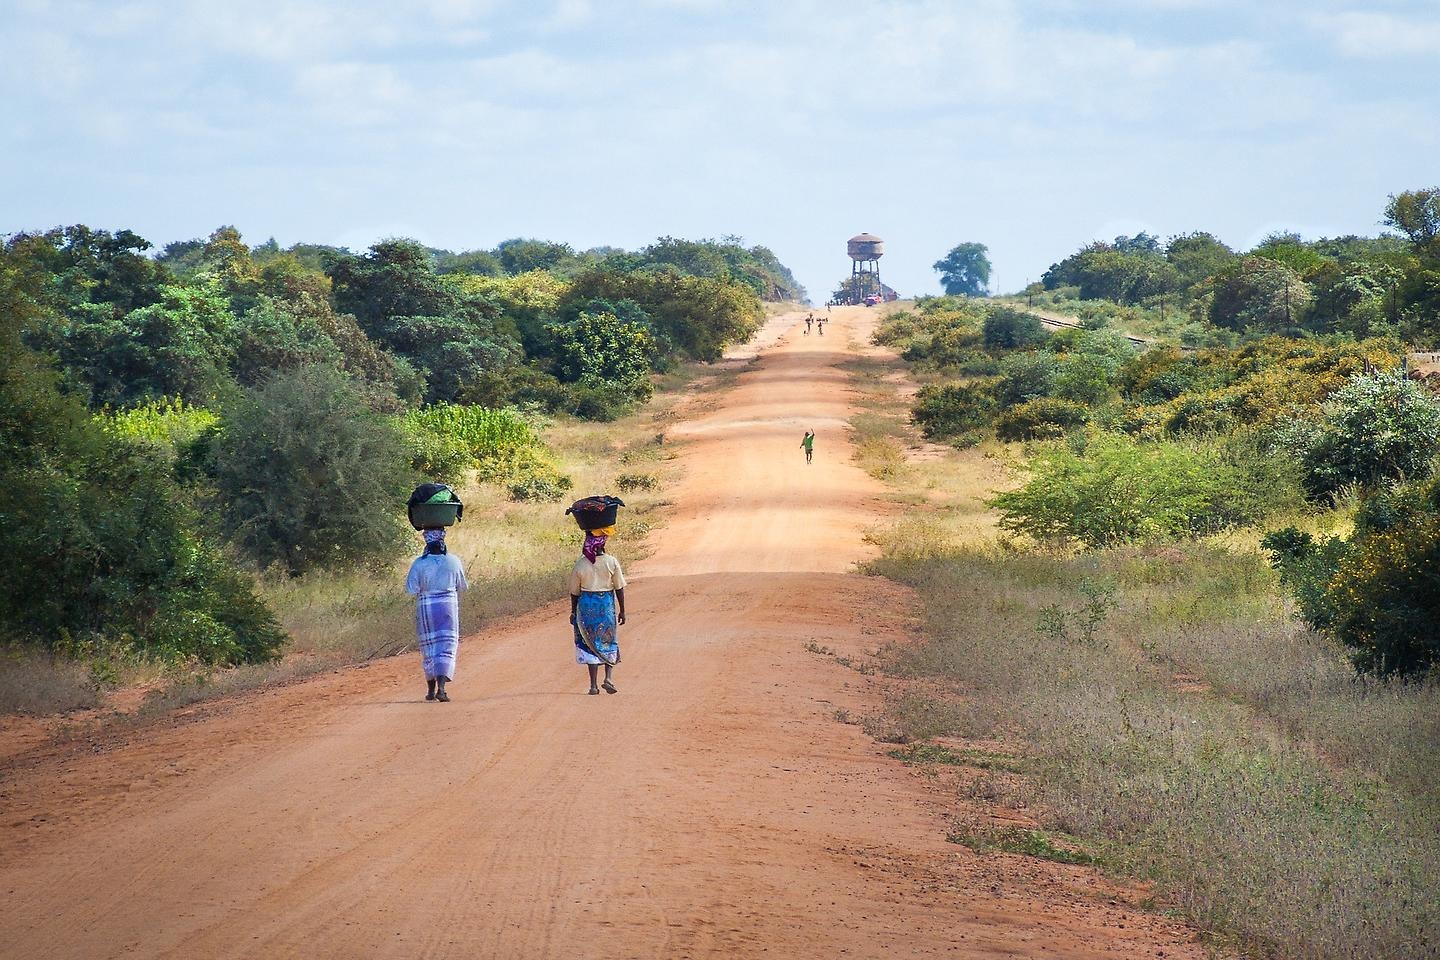 Women in the countryside in Mozambique. 